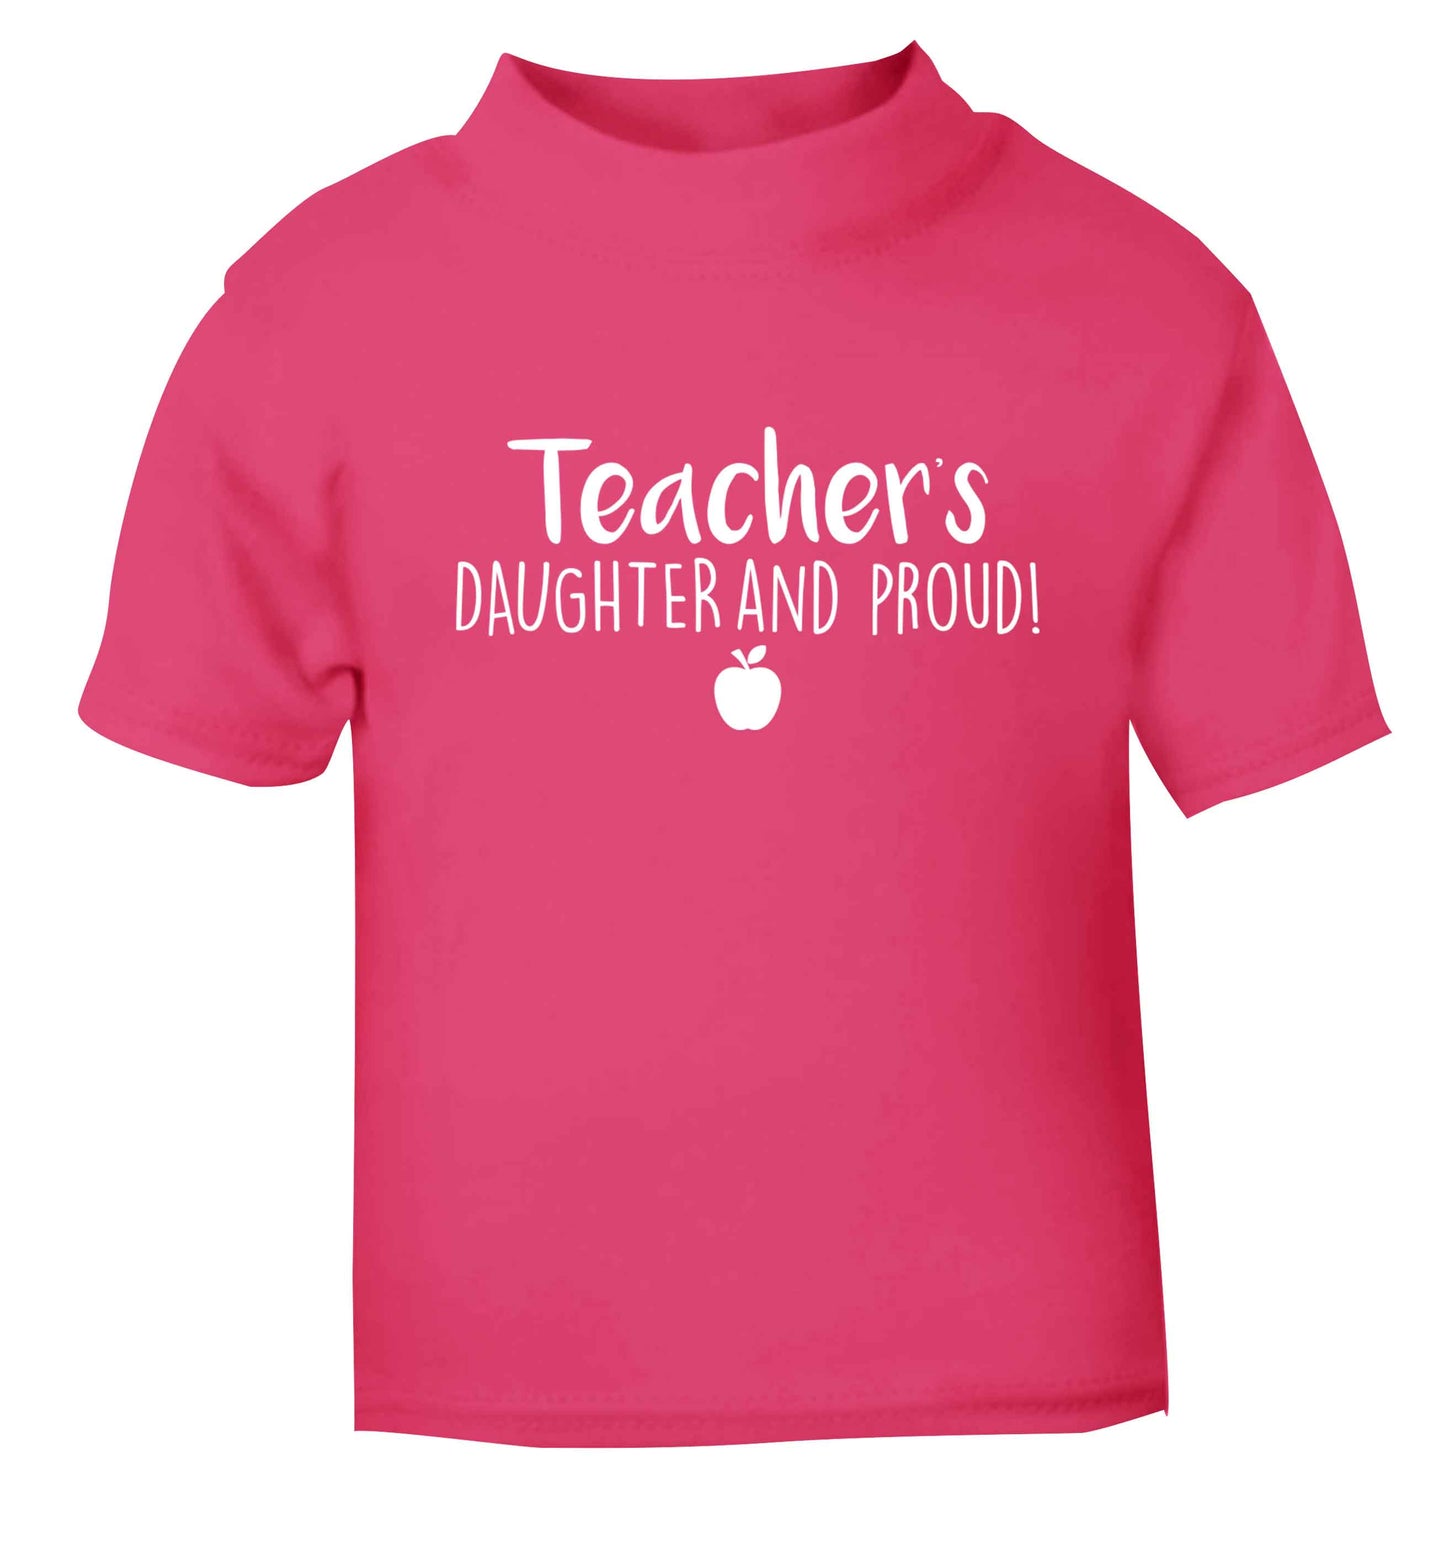 Teachers daughter and proud pink baby toddler Tshirt 2 Years